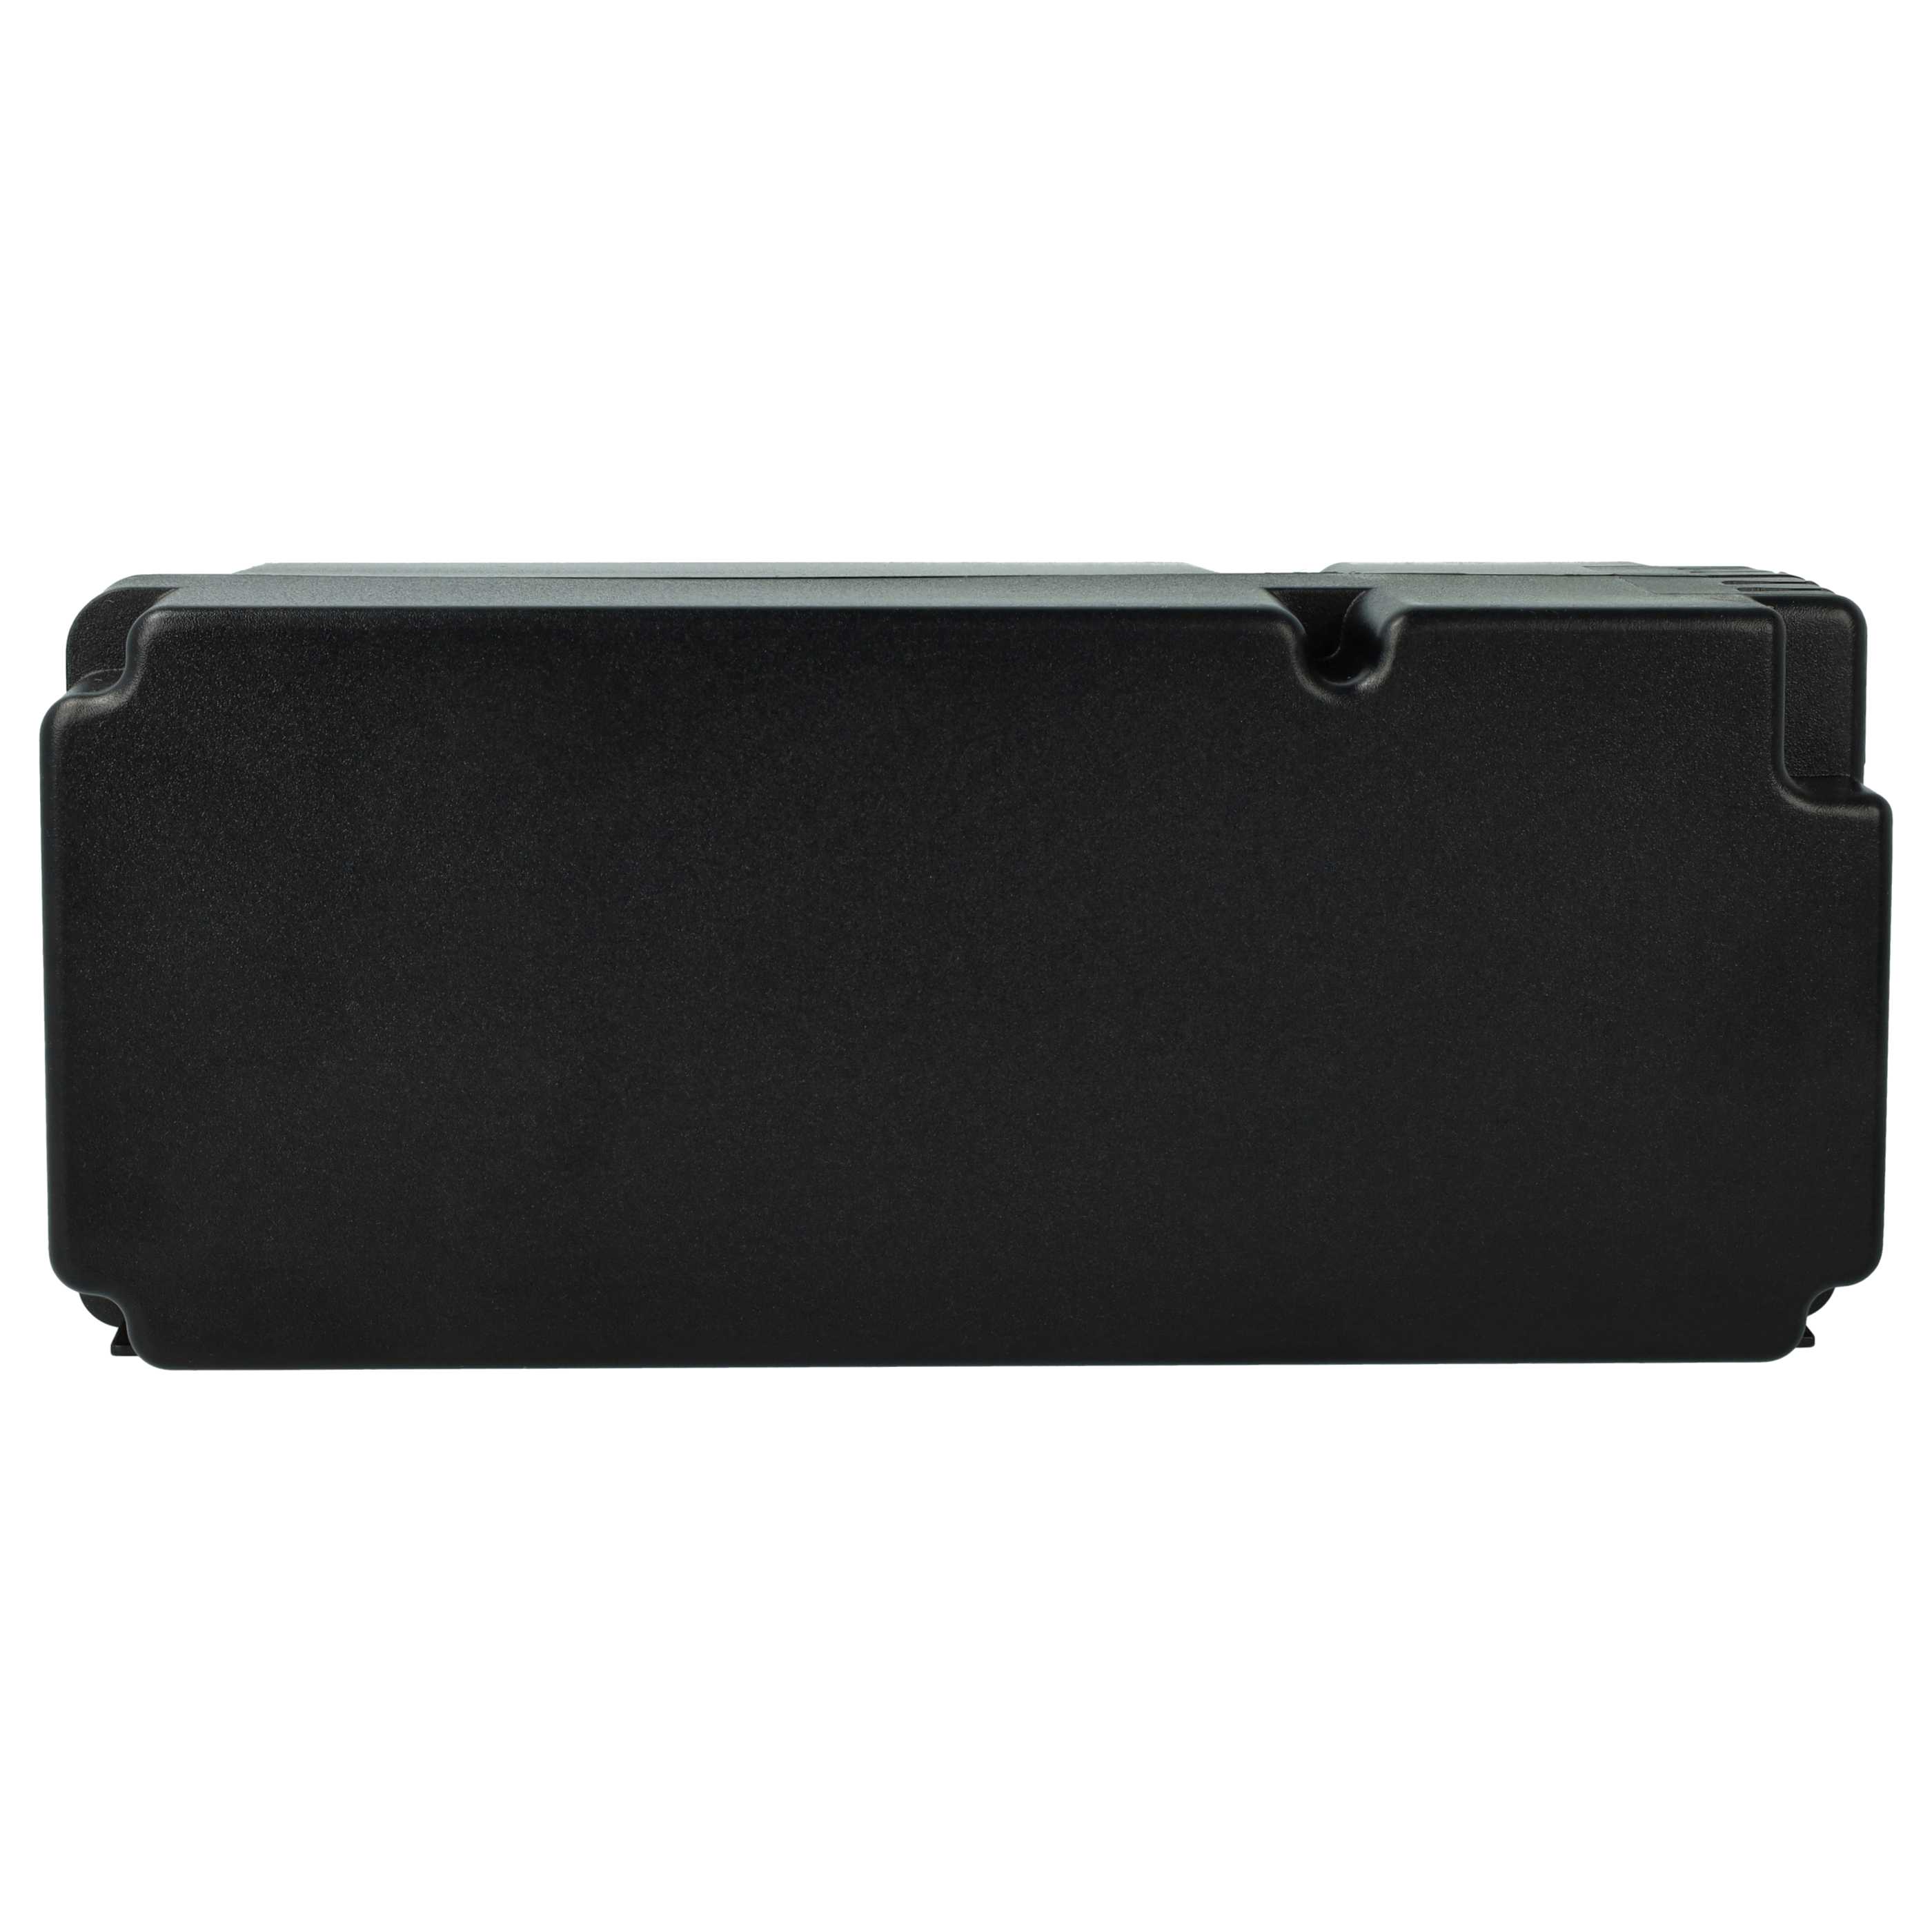 Lawnmower Battery Replacement for Yard Force 862601, 862615, 0862622, 0862622001 - 5000mAh 25.2V Li-Ion, black